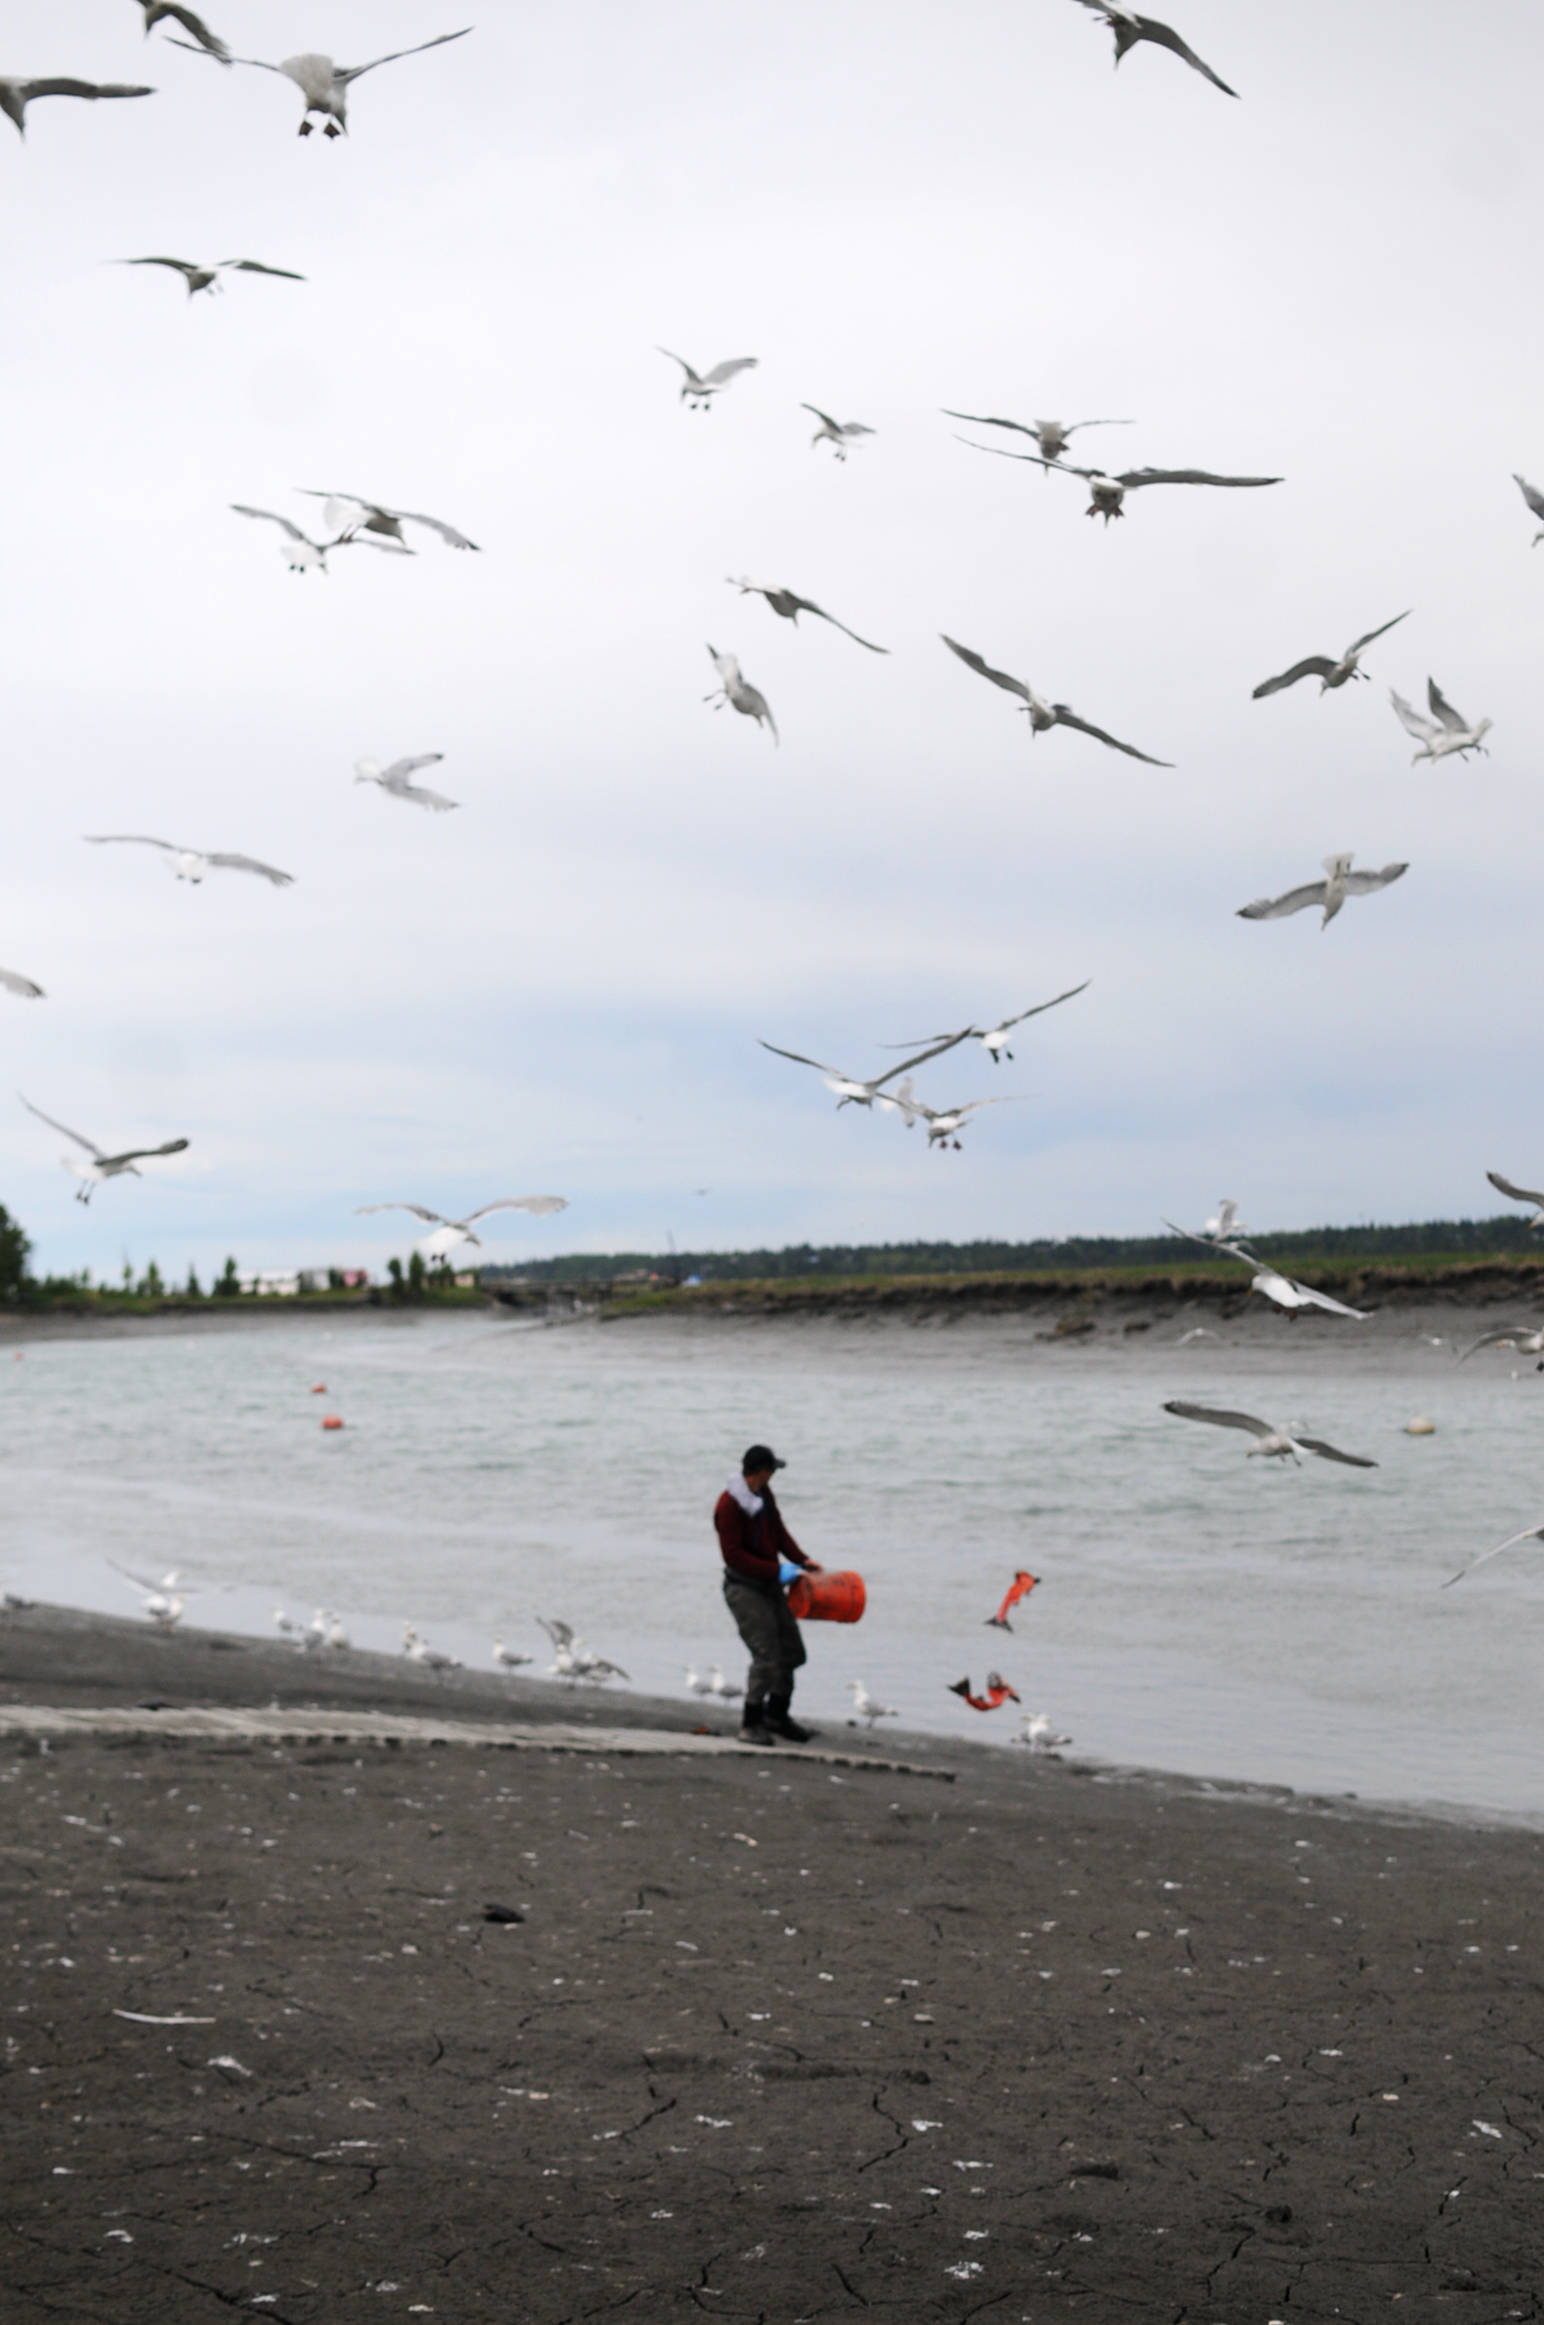 Seagulls swarm as a fishing guide tosses fish waste into the shallows of the Kasilof River on Monday, June 29, 2017 in Kasilof, Alaska. (Photo by Elizabeth Earl/Peninsula Clarion, file) Seagulls swarm as a fishing guide tosses fish waste into the shallows of the Kasilof River on Monday, June 29, 2017 in Kasilof, Alaska. (Photo by Elizabeth Earl/Peninsula Clarion, file)